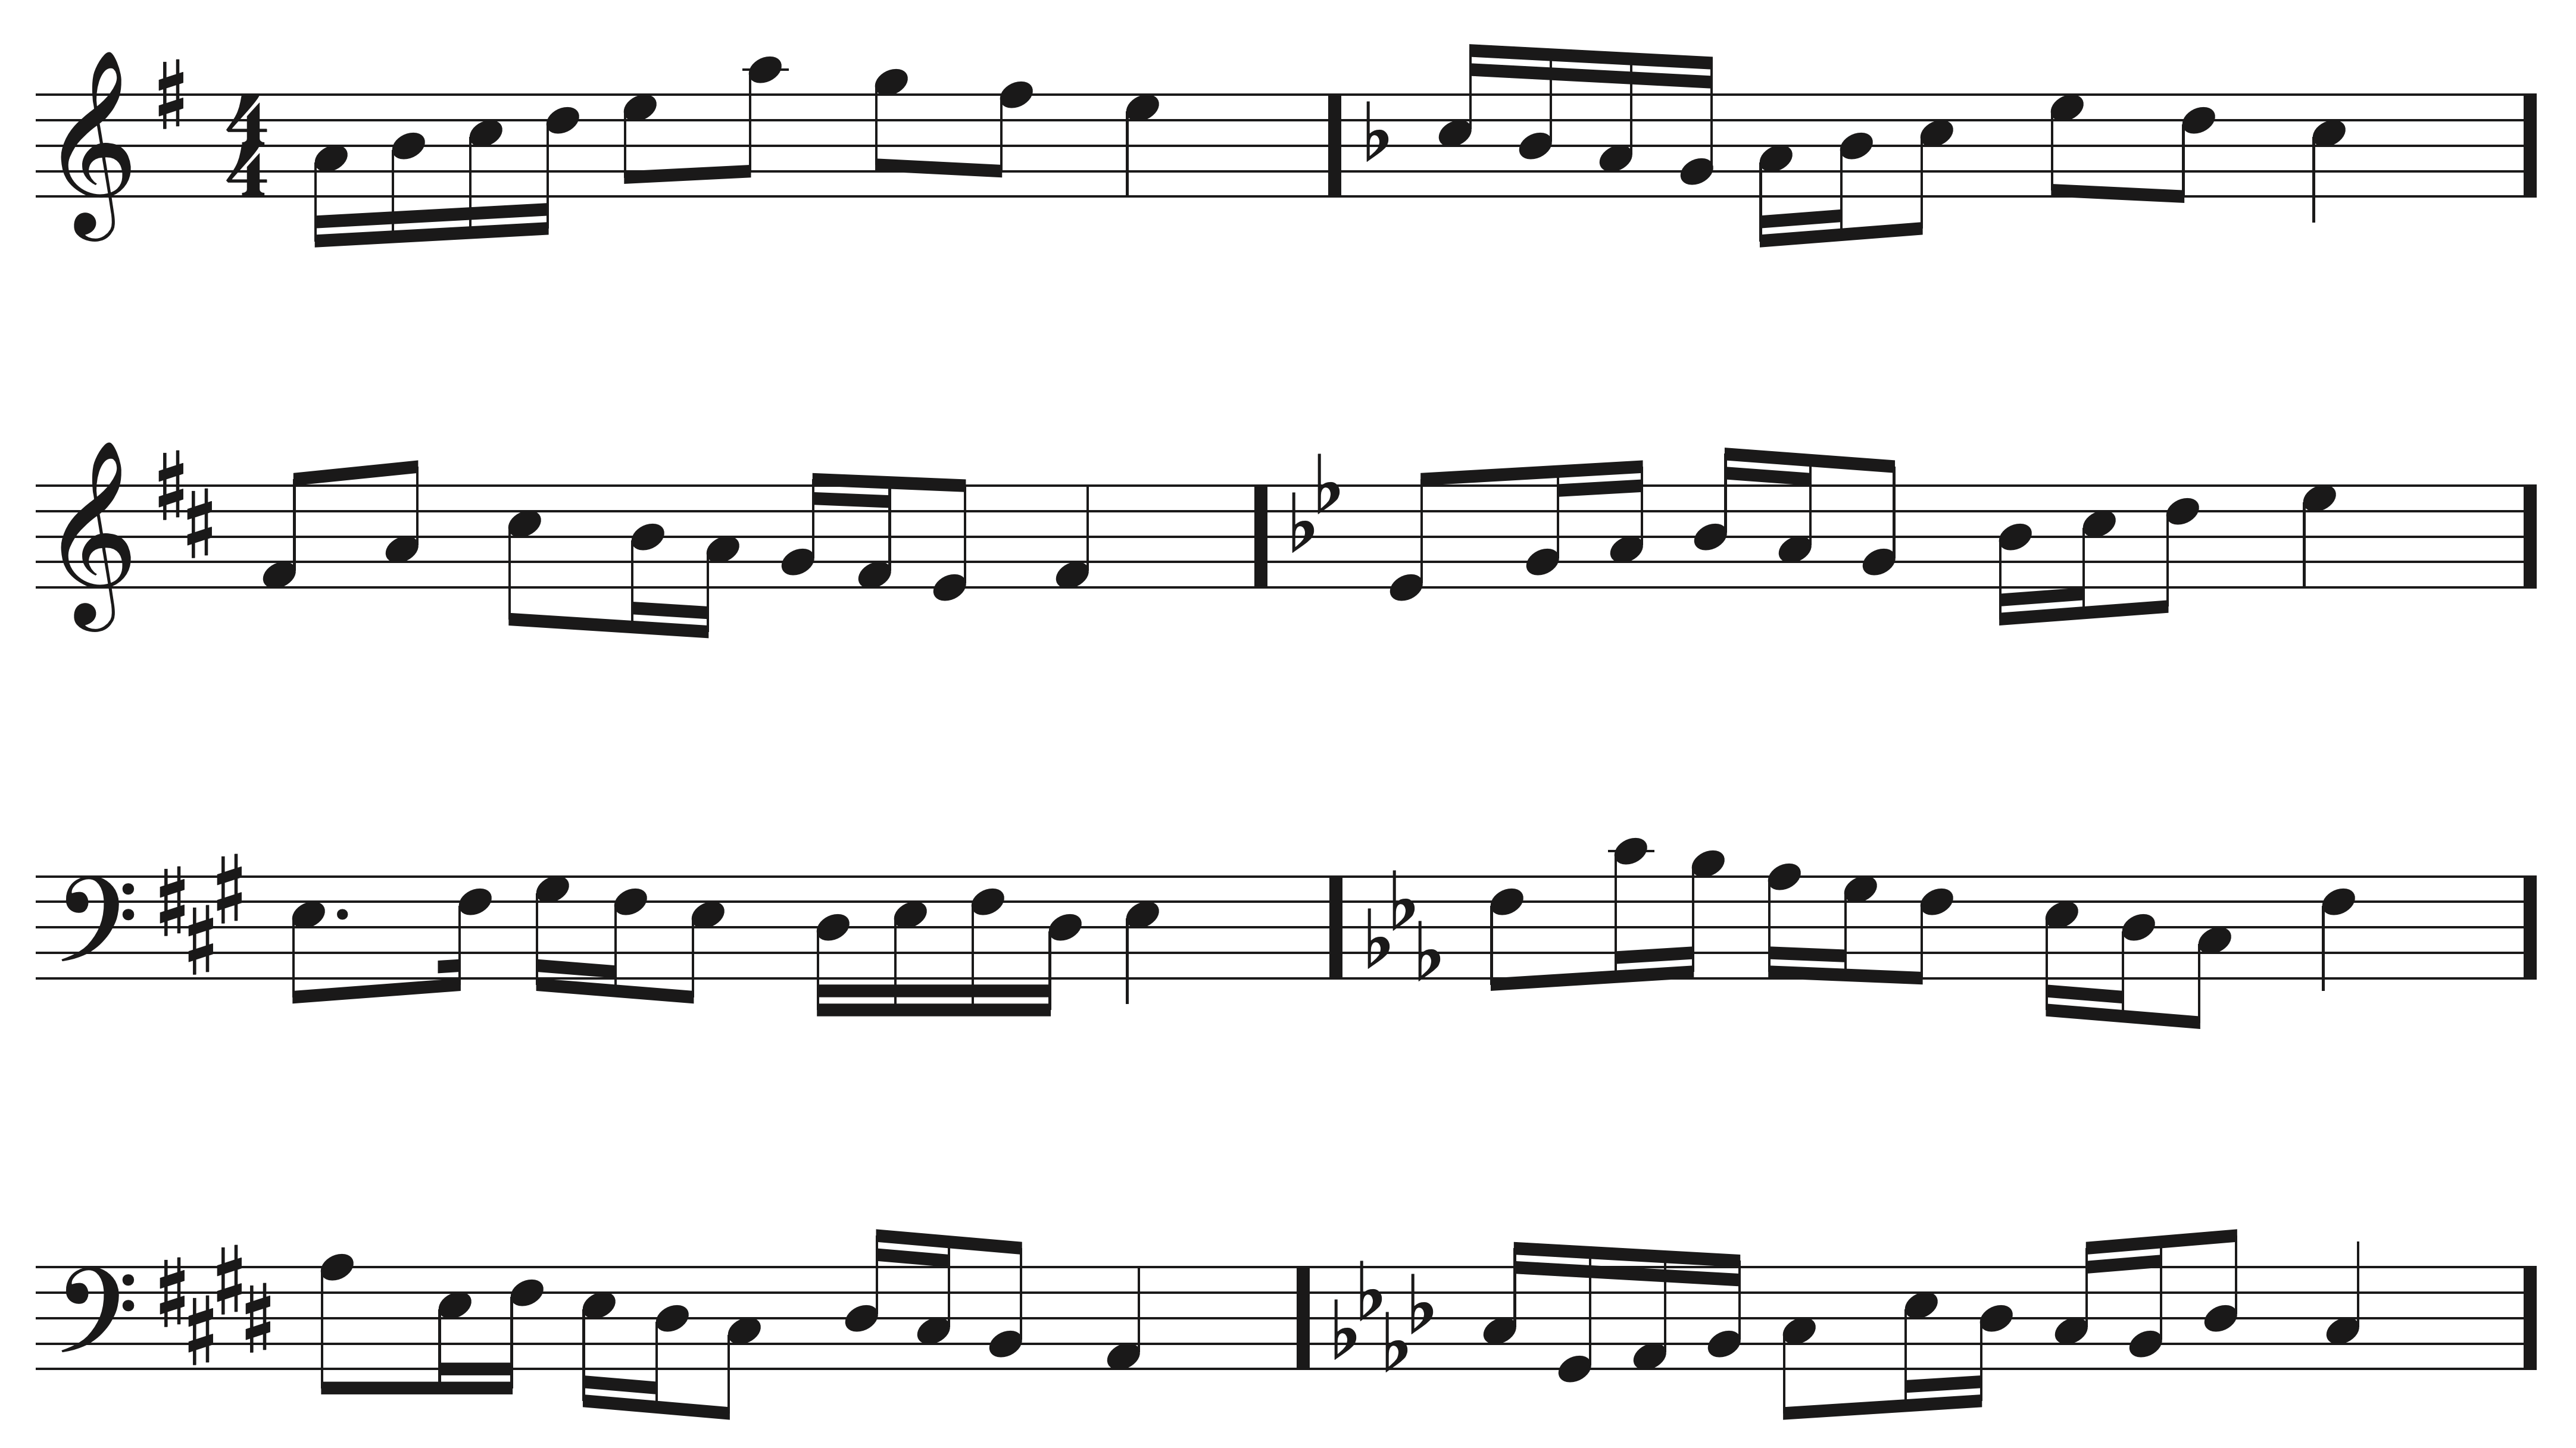 Modal Scales Sight Singing exercise example